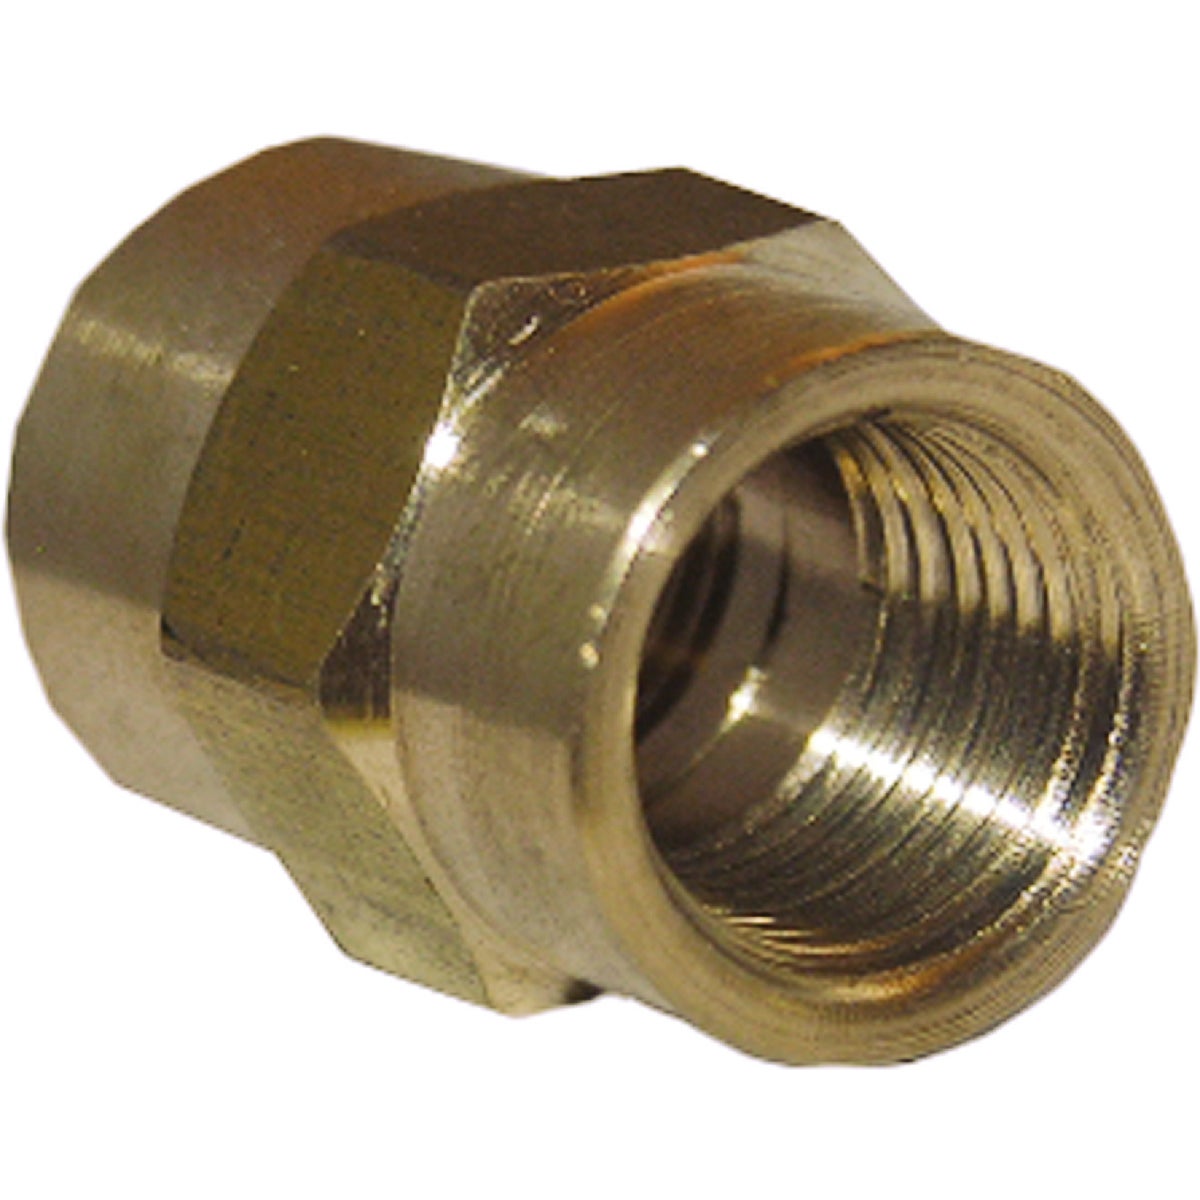 Lasco 1/4 In. FPT x 1/4 In. FPT Yellow Brass Coupling